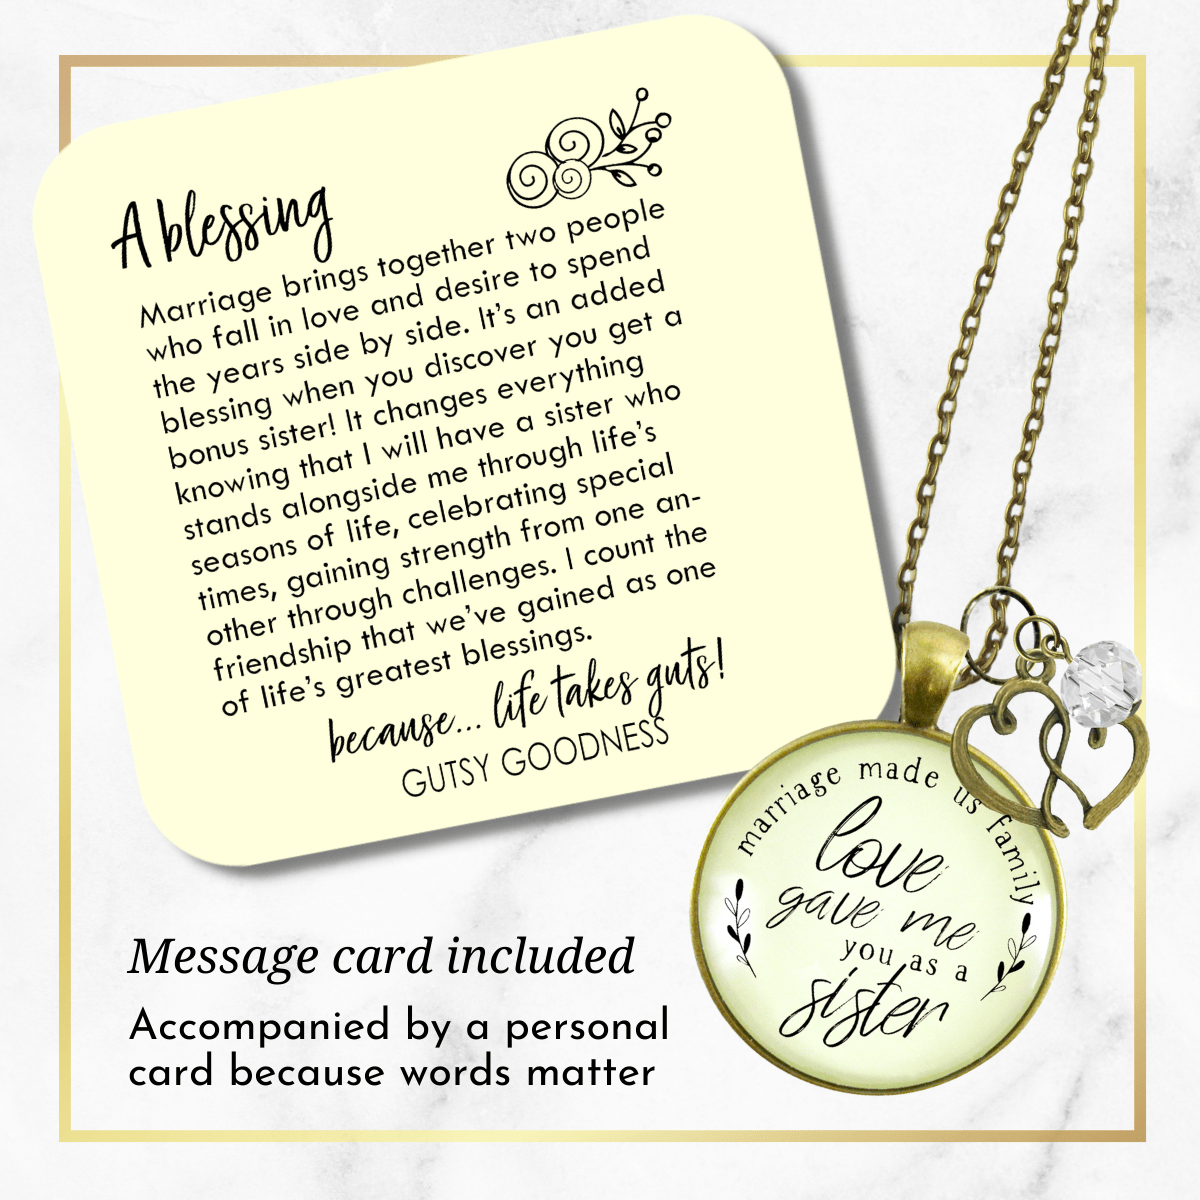 Gutsy Goodness Sister in Law Necklace Marriage Family Quote Wedding Jewelry Gift - Gutsy Goodness Handmade Jewelry;Sister In Law Necklace Marriage Family Quote Wedding Jewelry Gift - Gutsy Goodness Handmade Jewelry Gifts